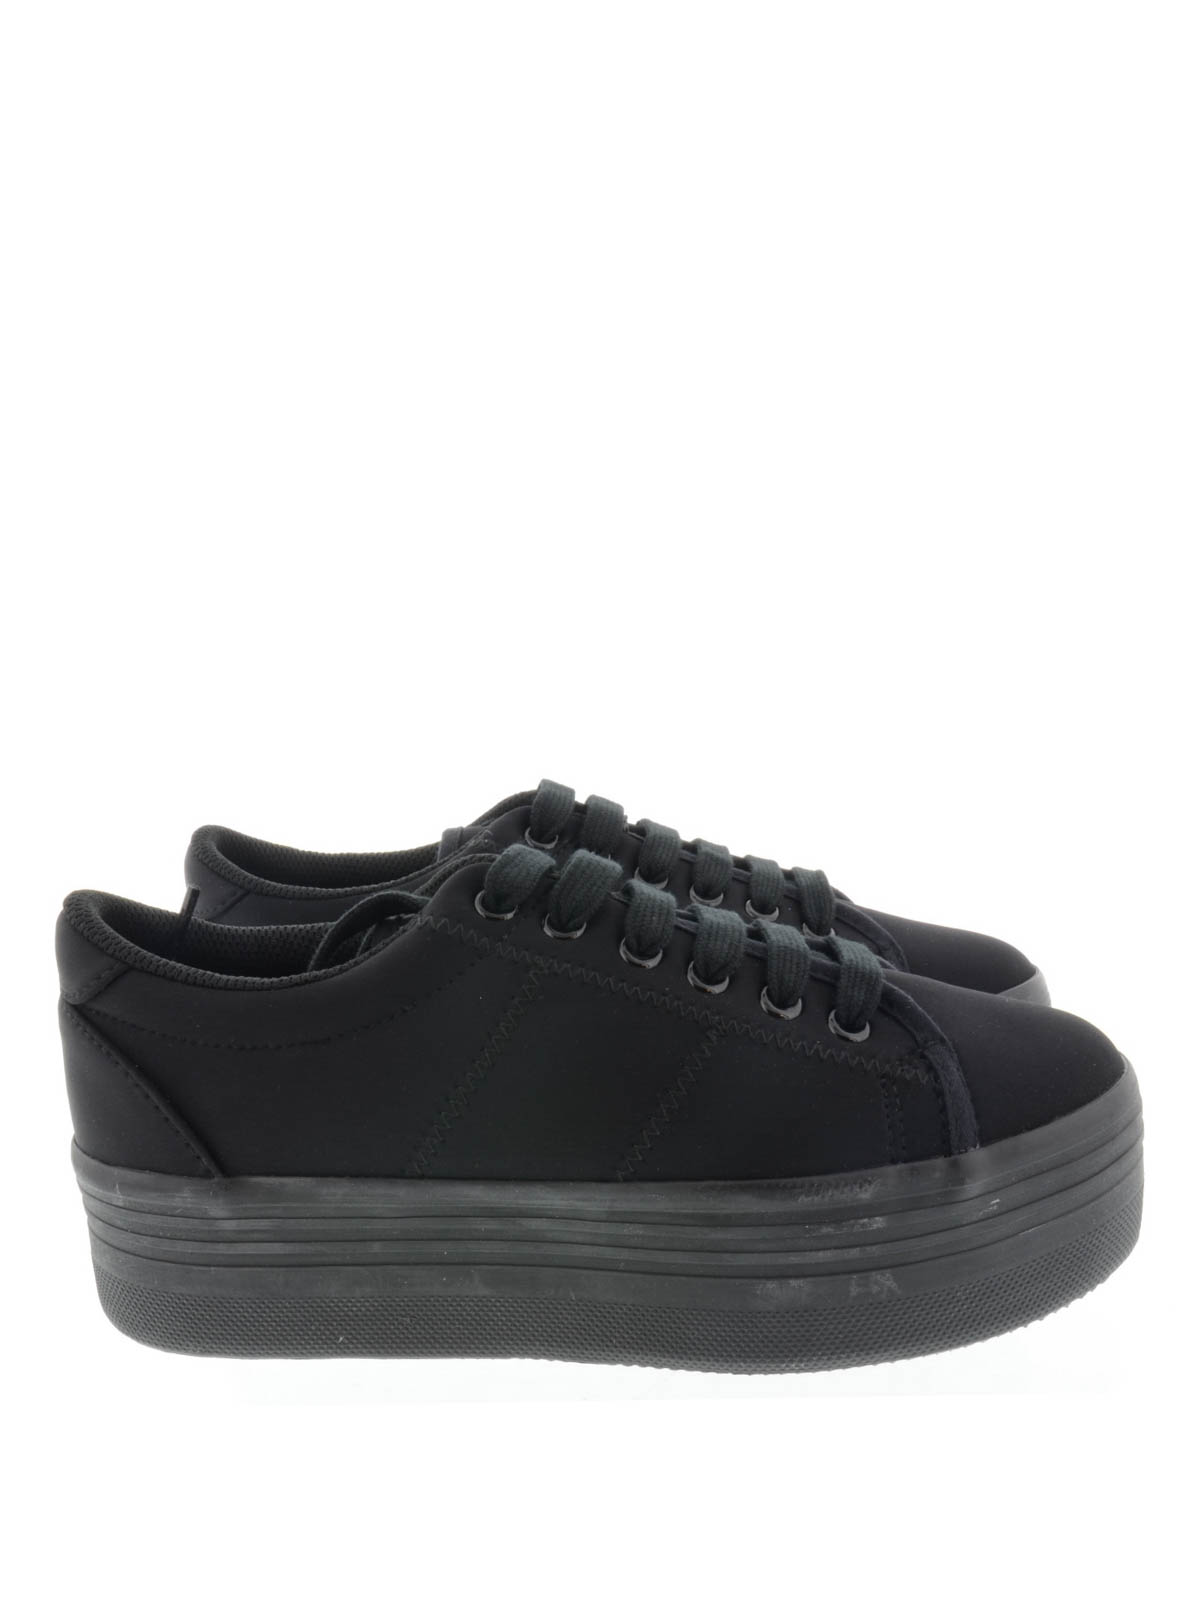 Trainers Jeffrey Campbell - Zomg sneakers - ZOMGNEOPRENEBLACK